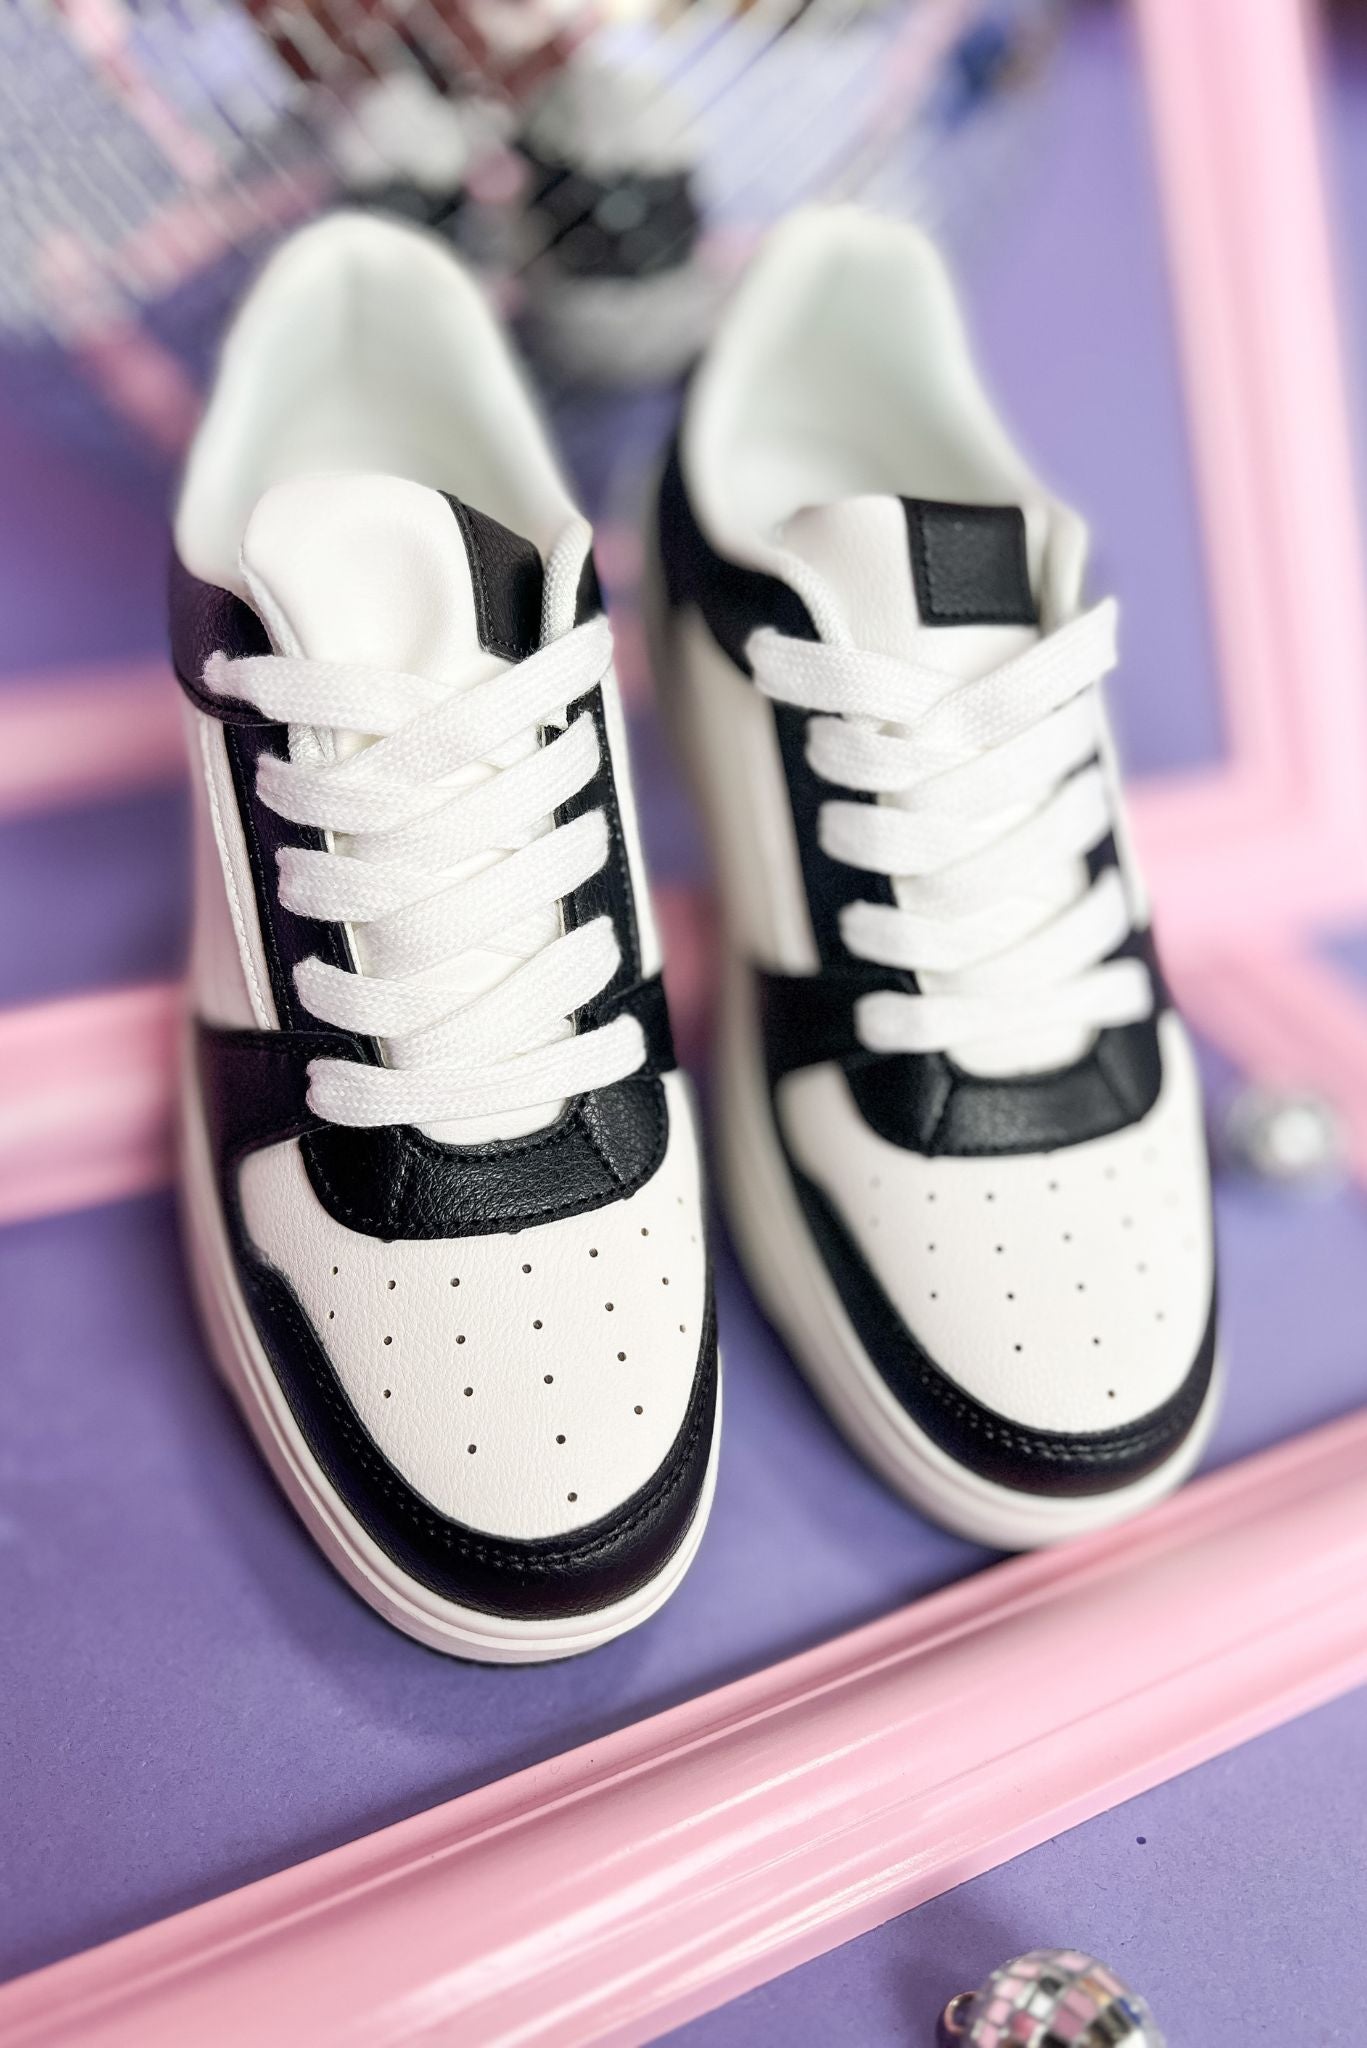  Black White Low Top Sneakers, shoes, black and white sneakers, shop style your senses by mallory fitzsimmons